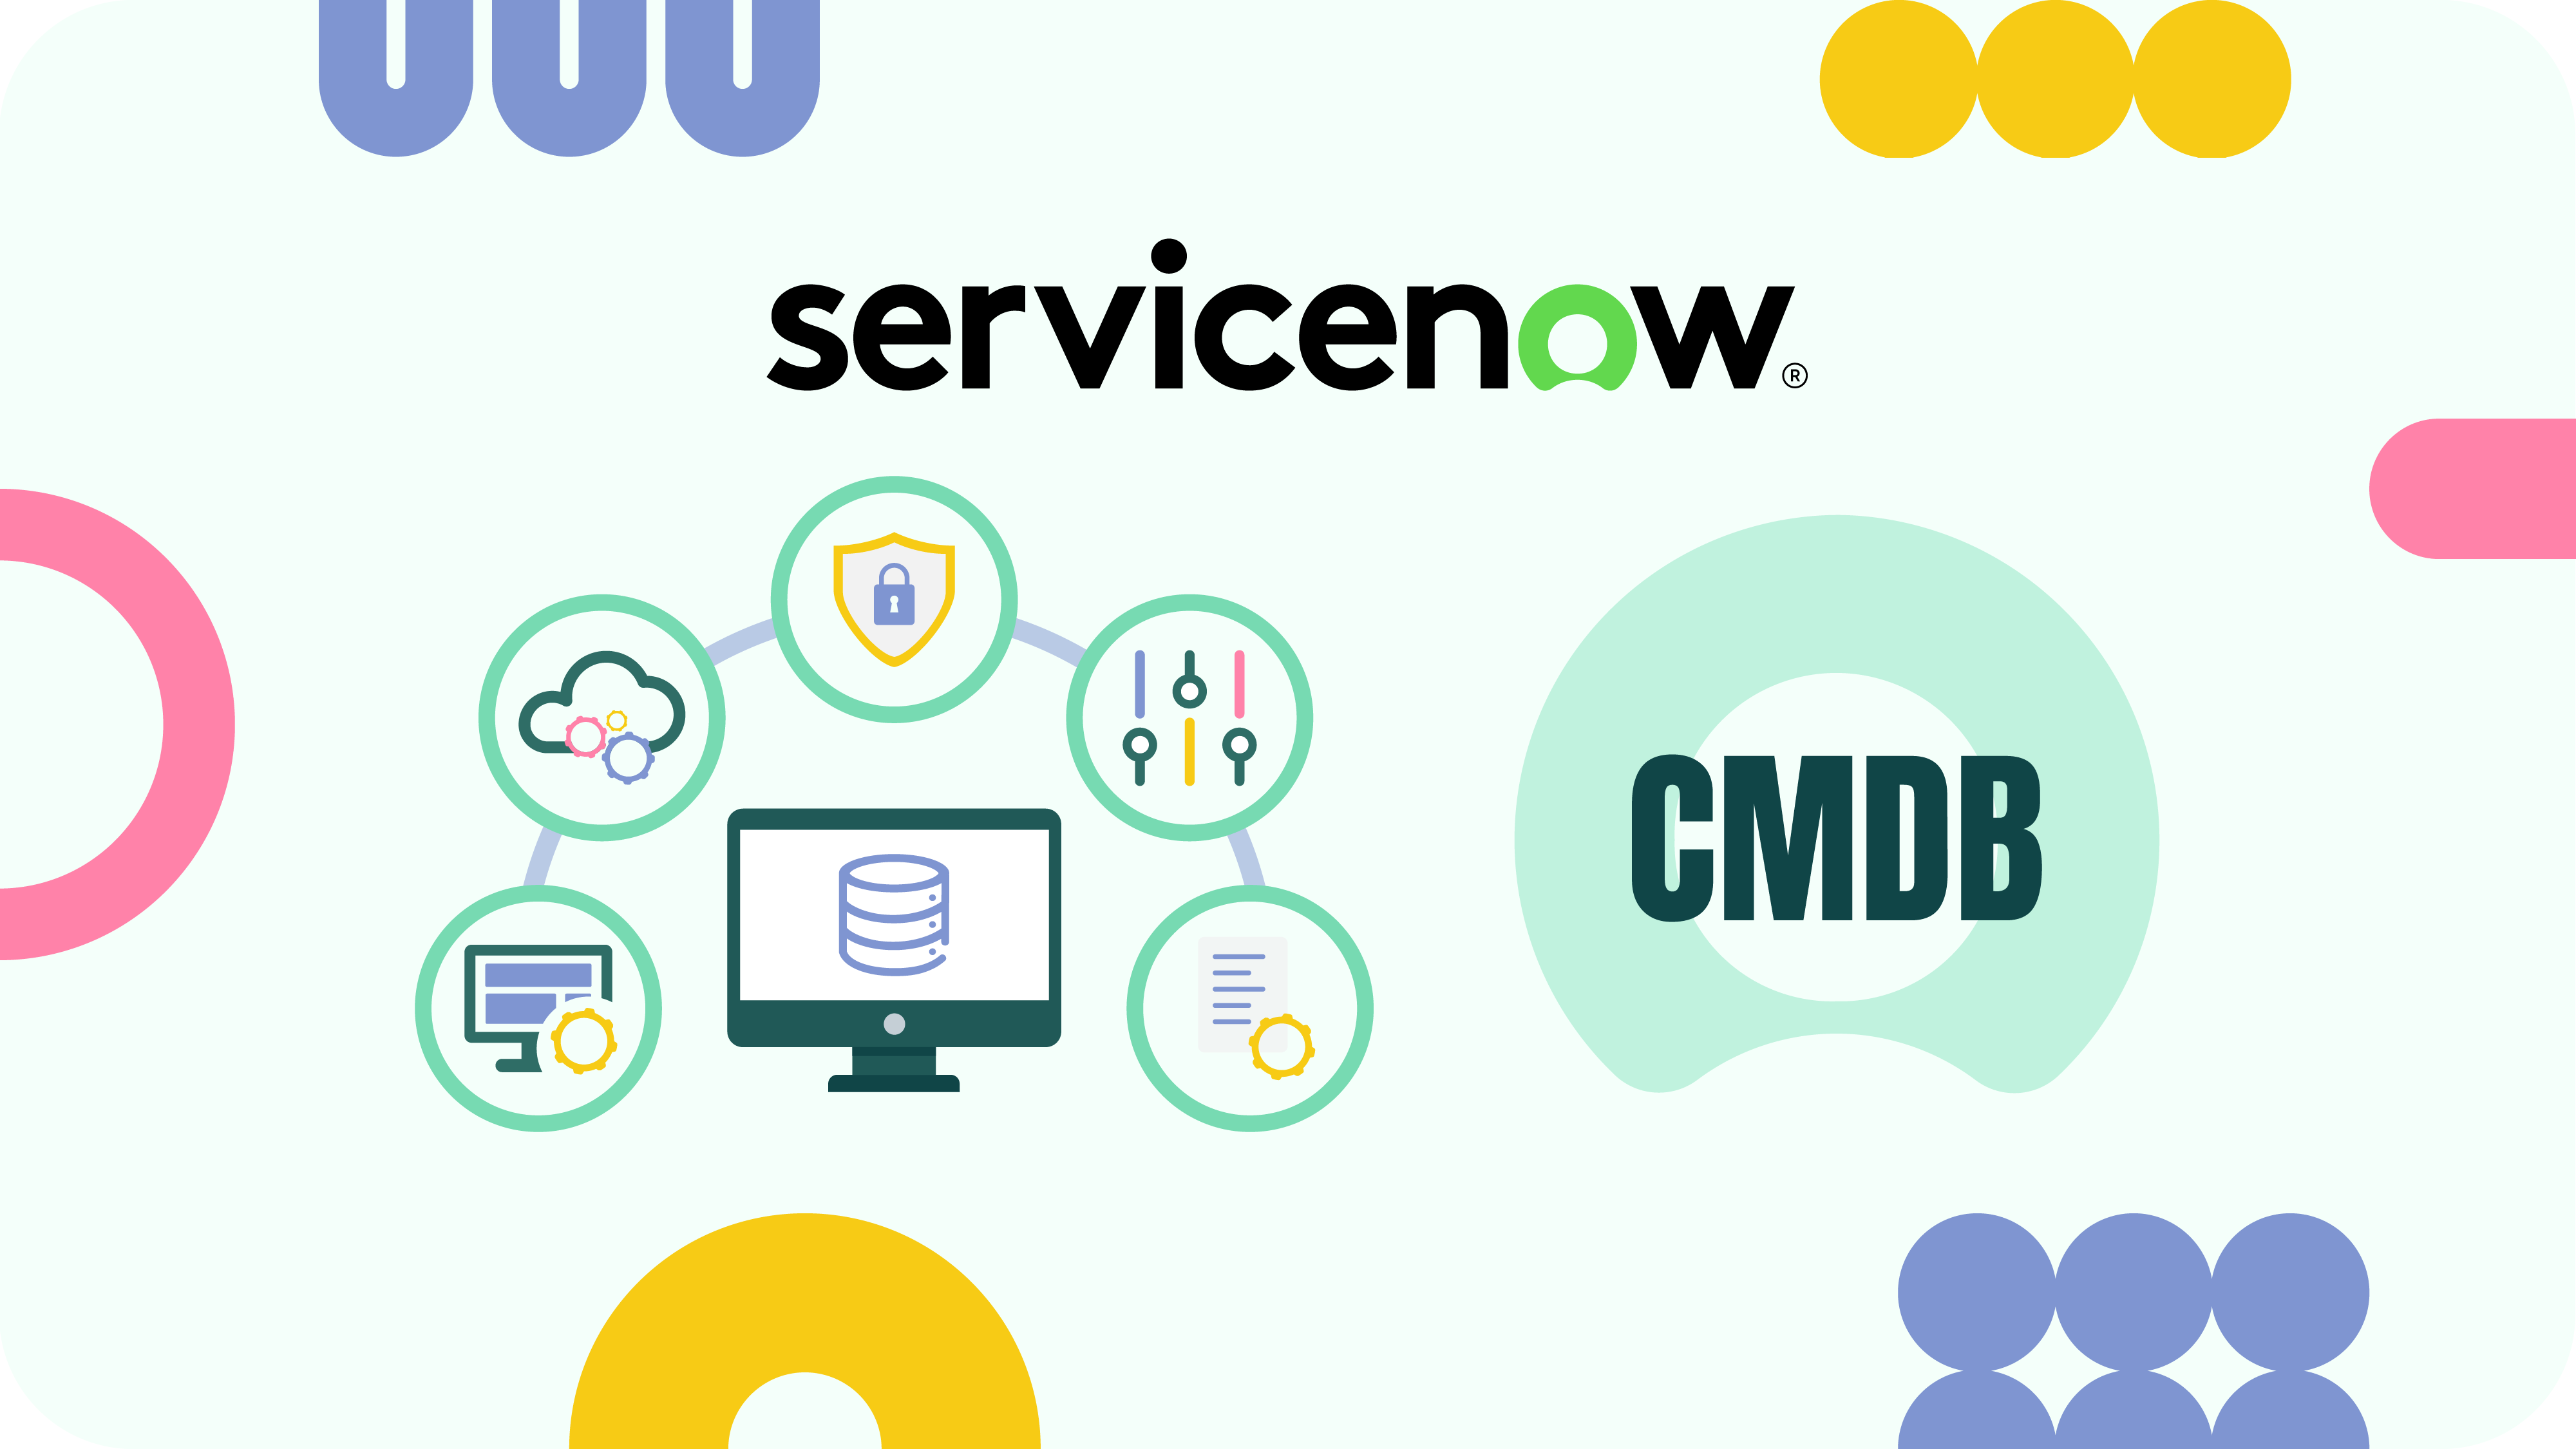 What is Configuration Management Database (CMDB) in ServiceNow